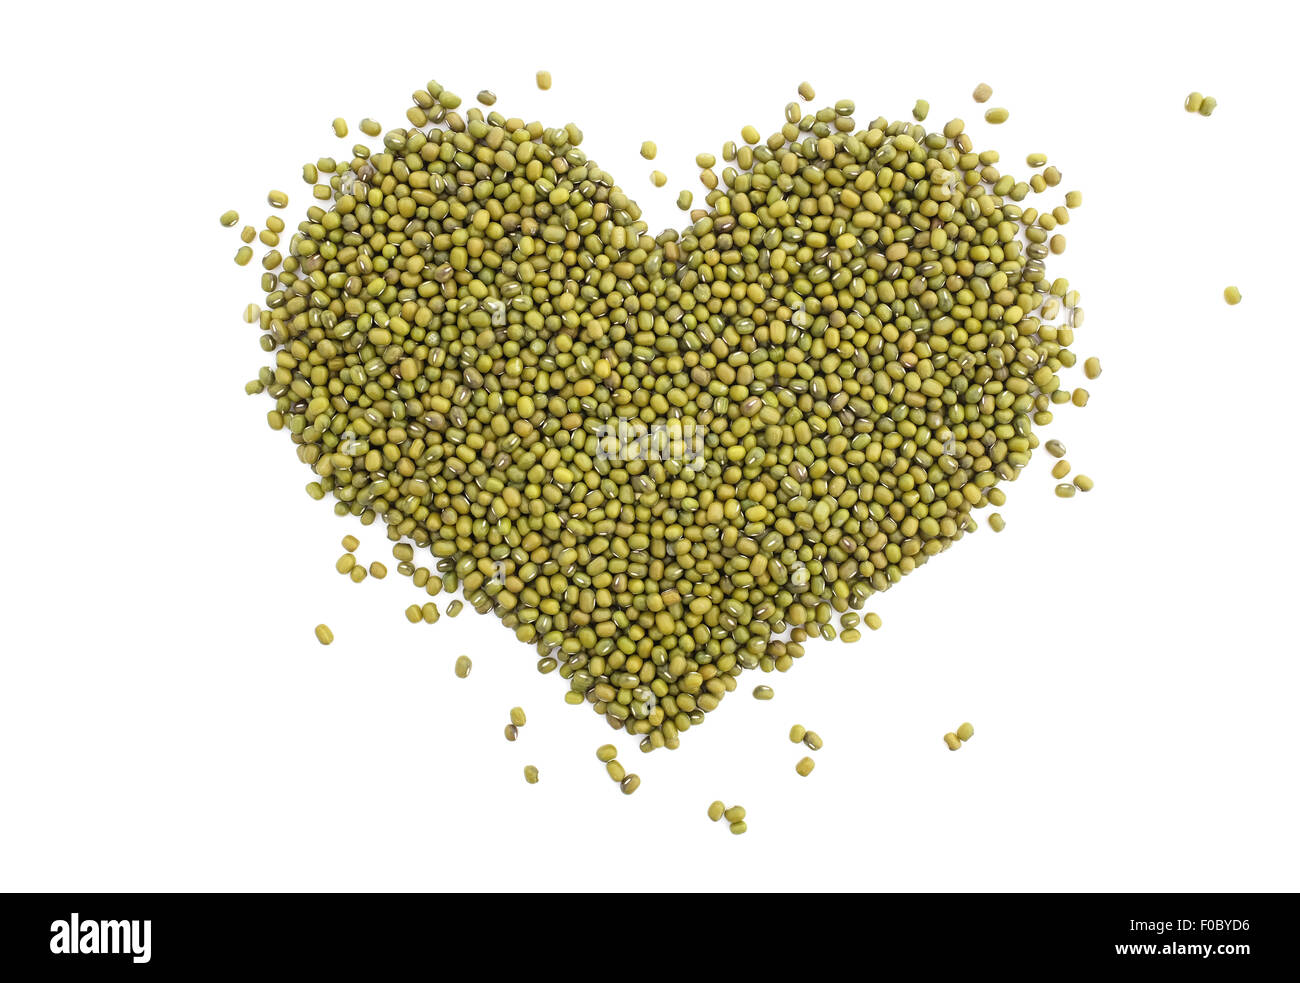 Mung beans in a heart shape, isolated on a white background Stock Photo